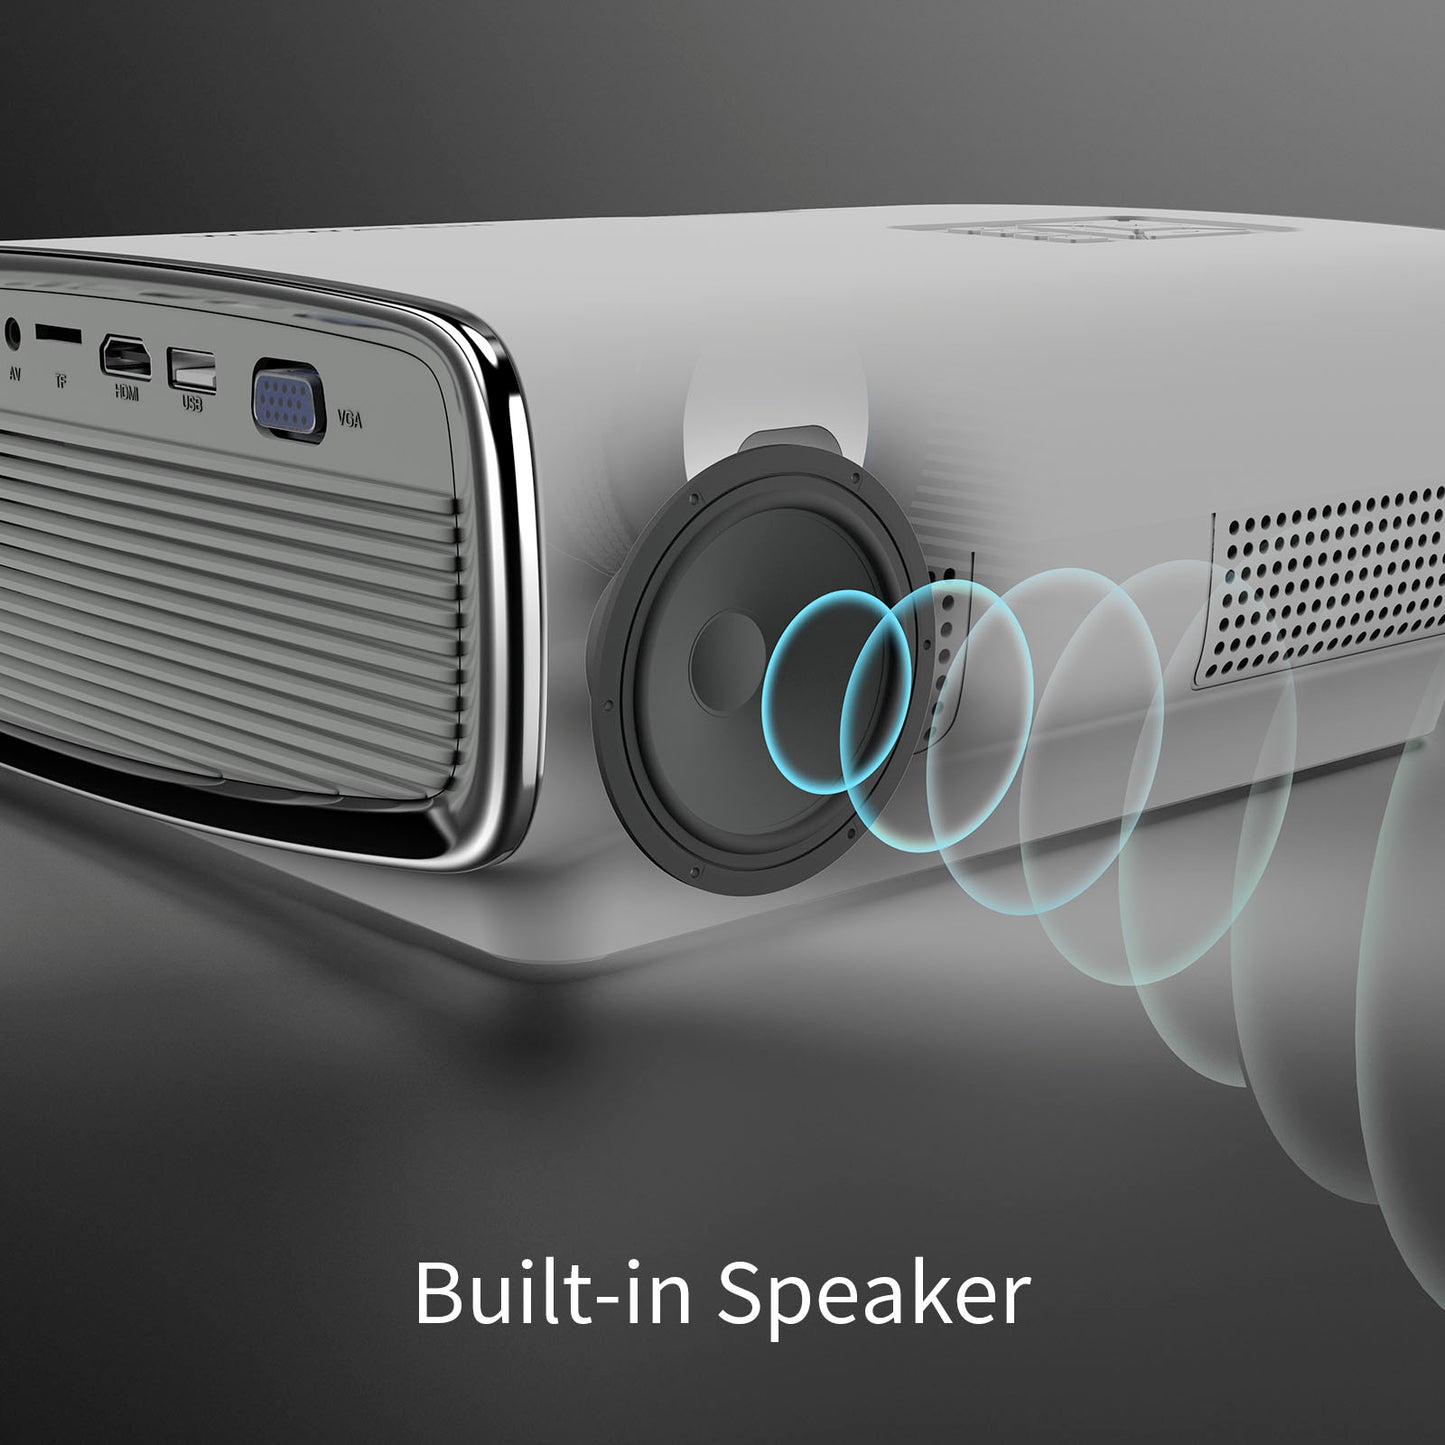 WEWATCH S1 Projector: Native 1080p, 4K Support, 360 Lumens, Netflix, WiFi & More